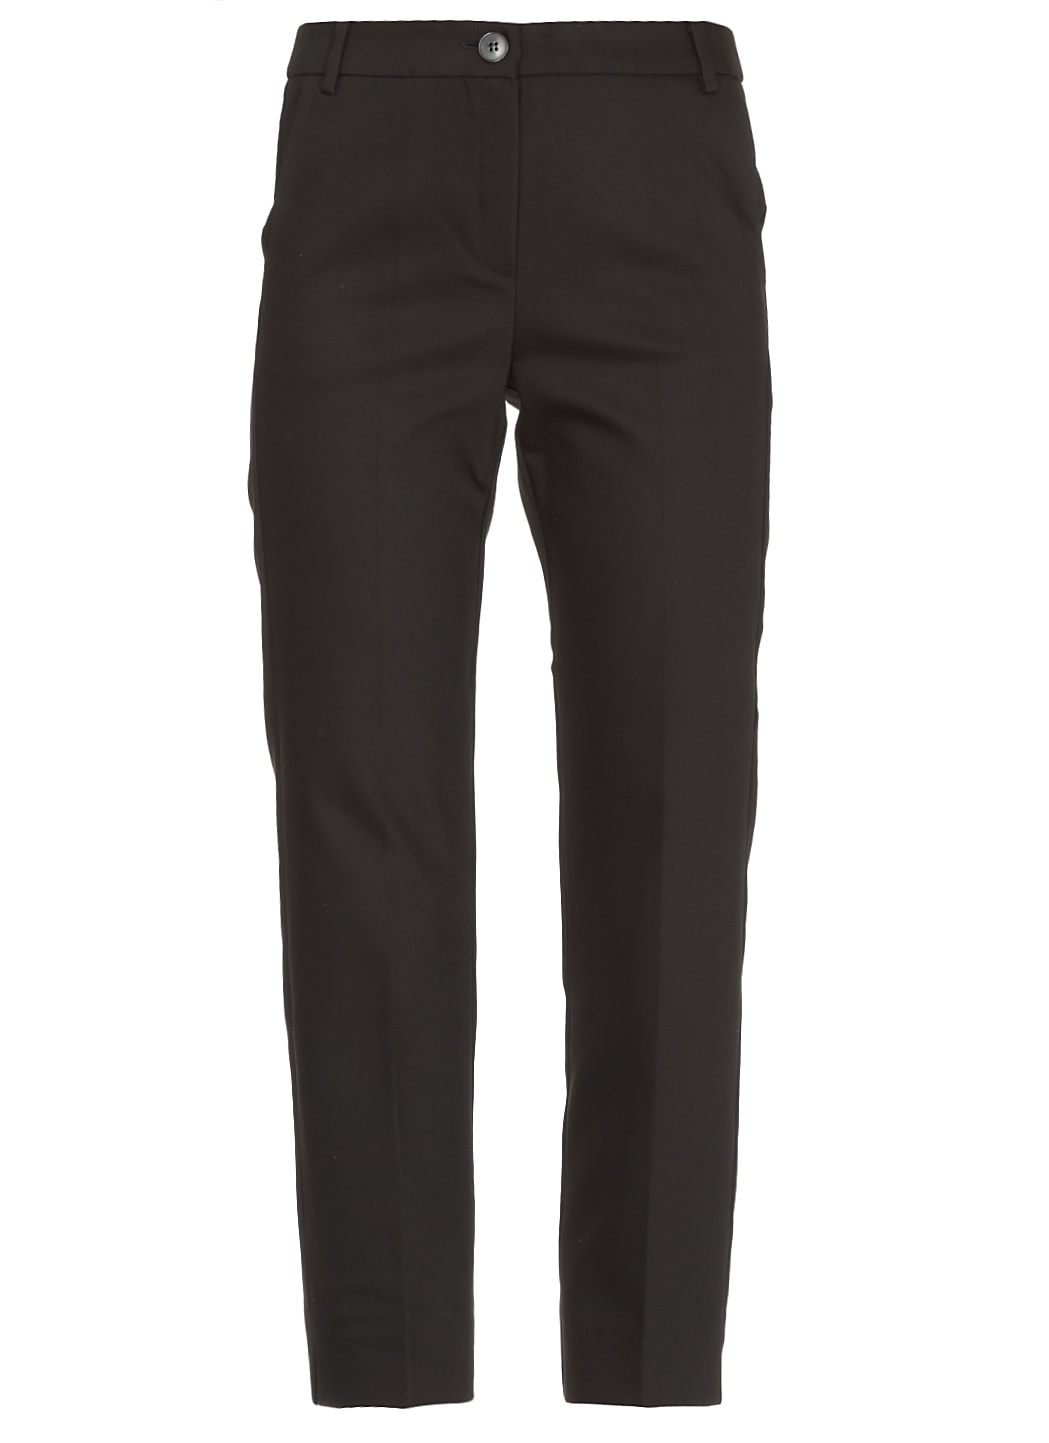 Marella Cotton Blend Tailored Trousers